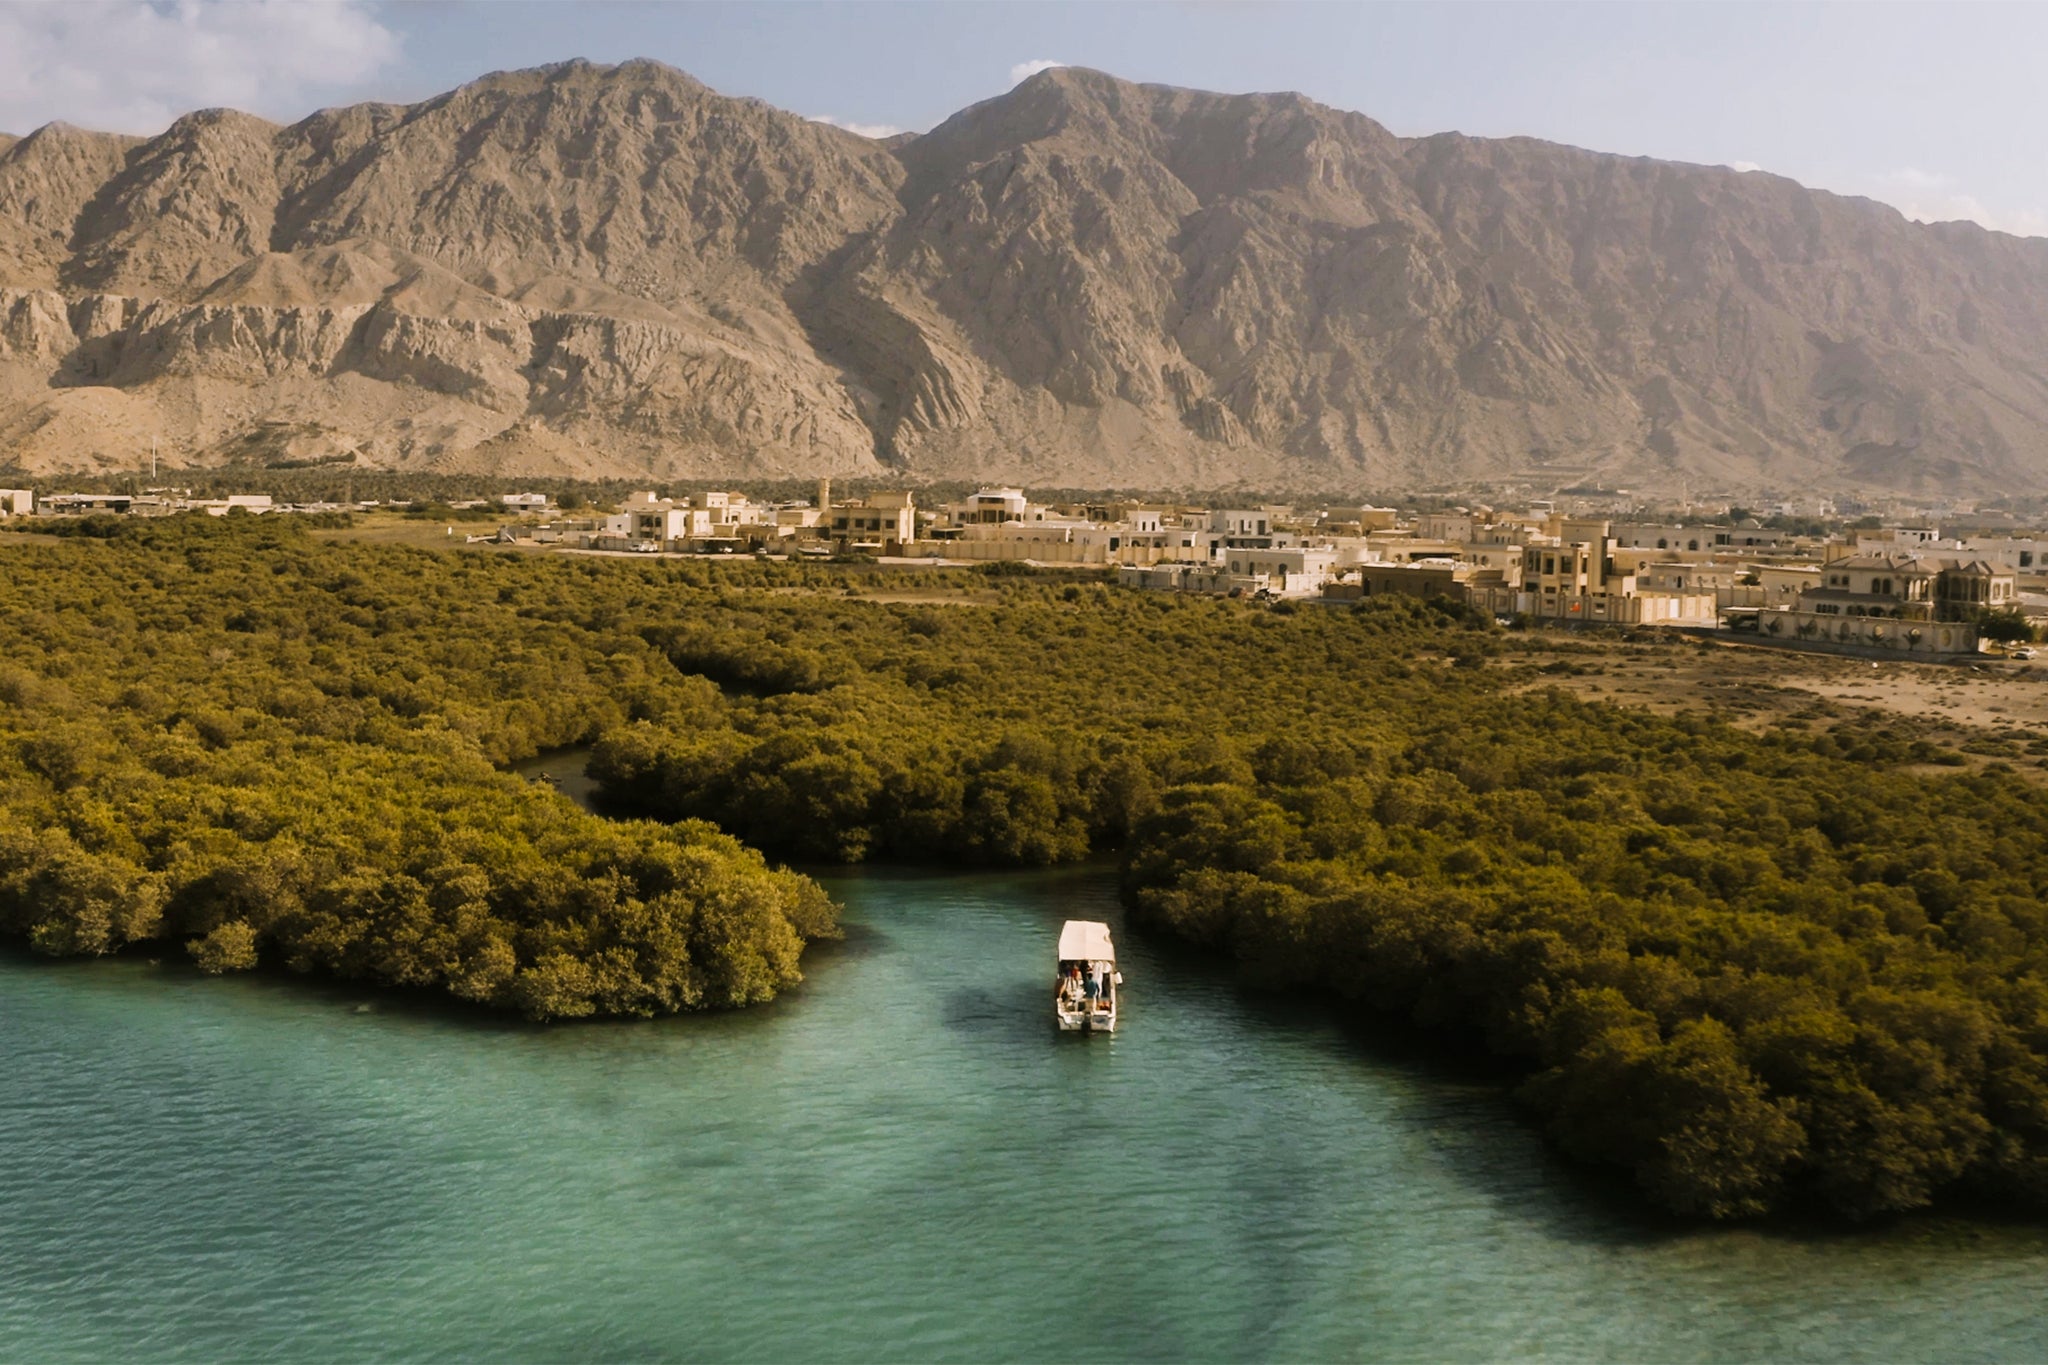 Discovering the world’s first Arabian pearl farm in the mangroves of Al Rams